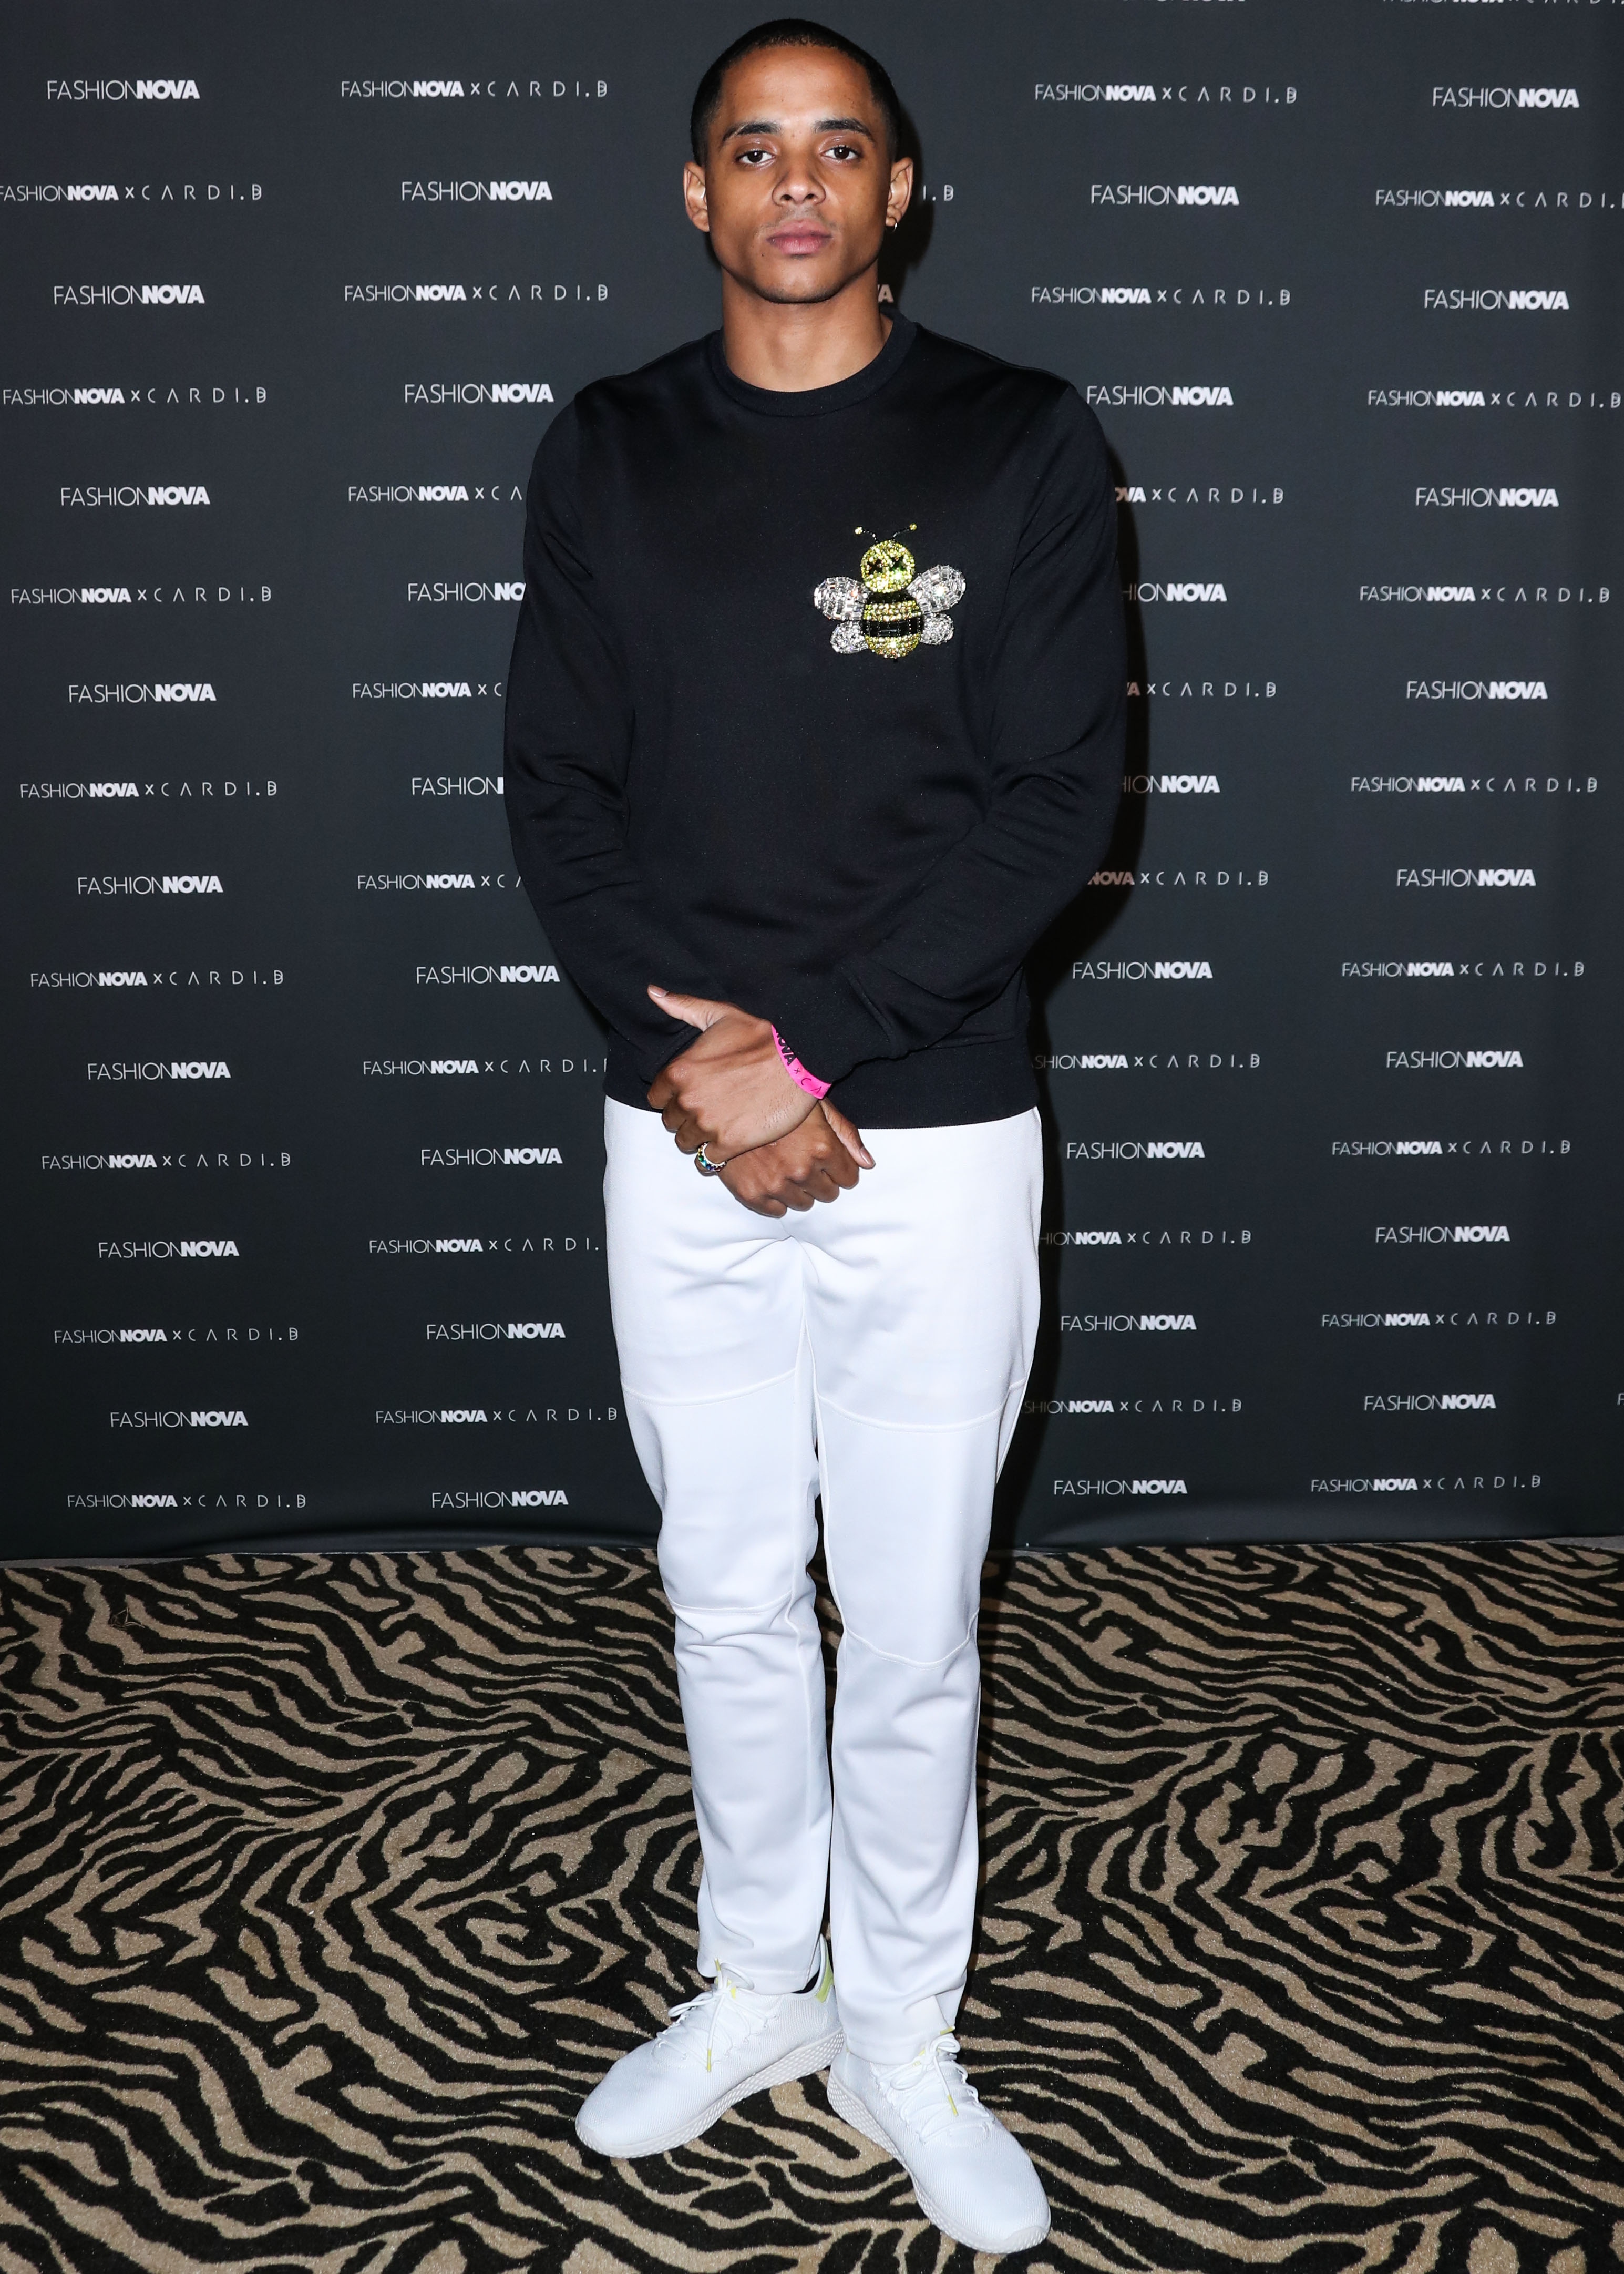 Cordell Broadus at The Fashion Nova x Cardi B Collection Launch Event